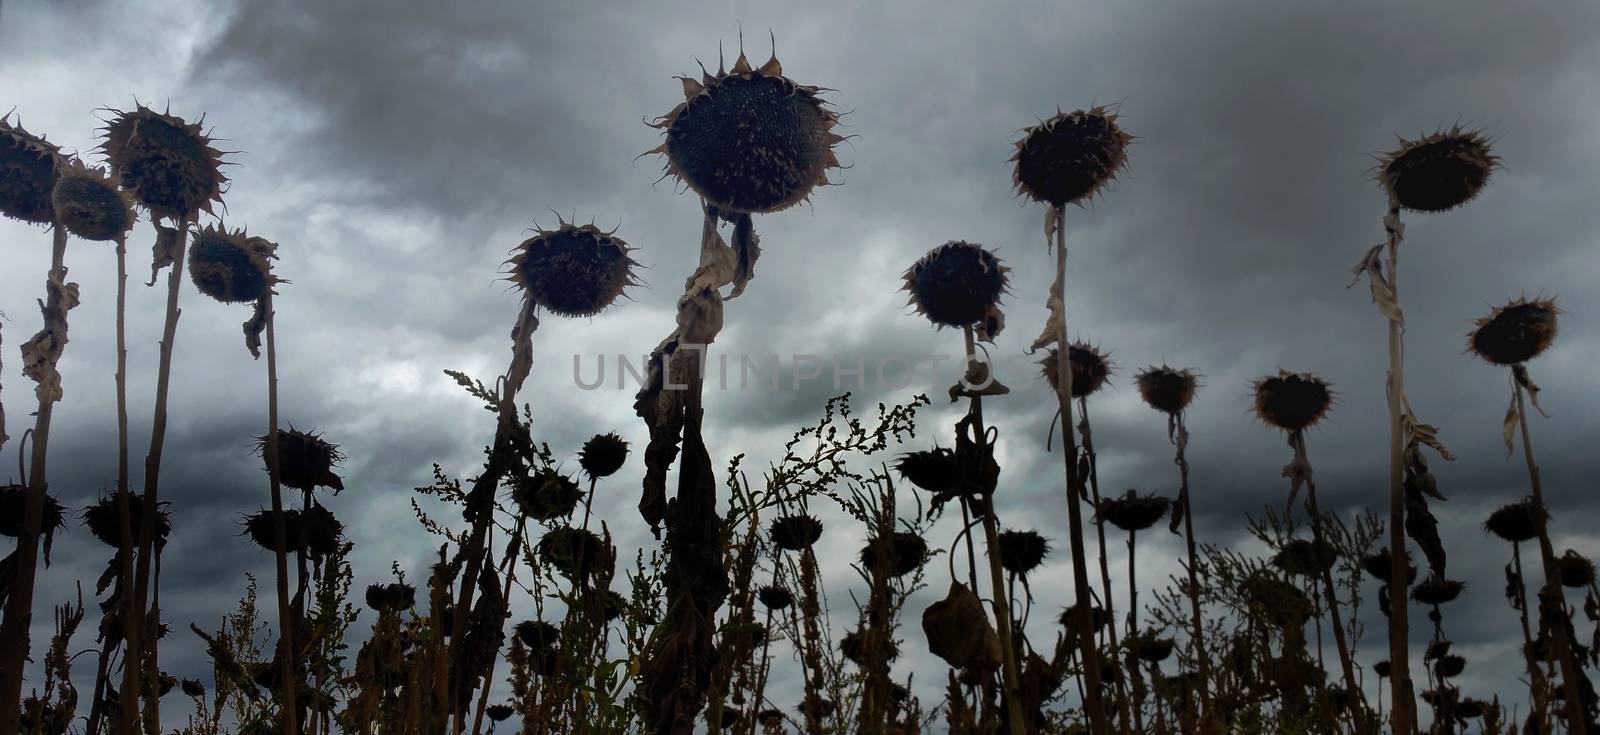 Vintage withered sunflowers in the autumn field